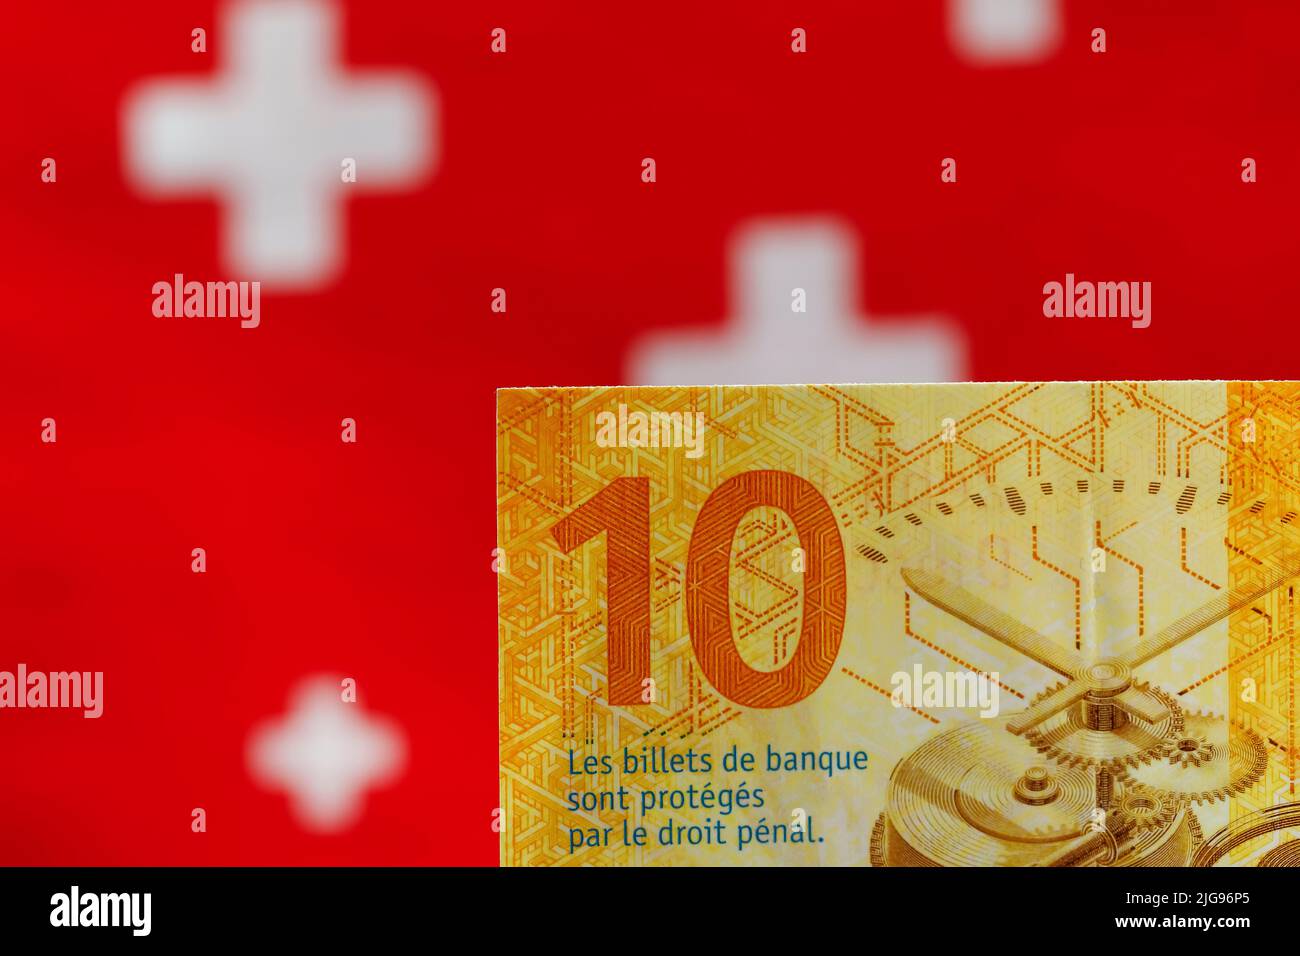 Ten Swiss francs banknote, and the flag symbols are visible in the background. This is new money and this is the eighth series of Swiss banknotes that Stock Photo